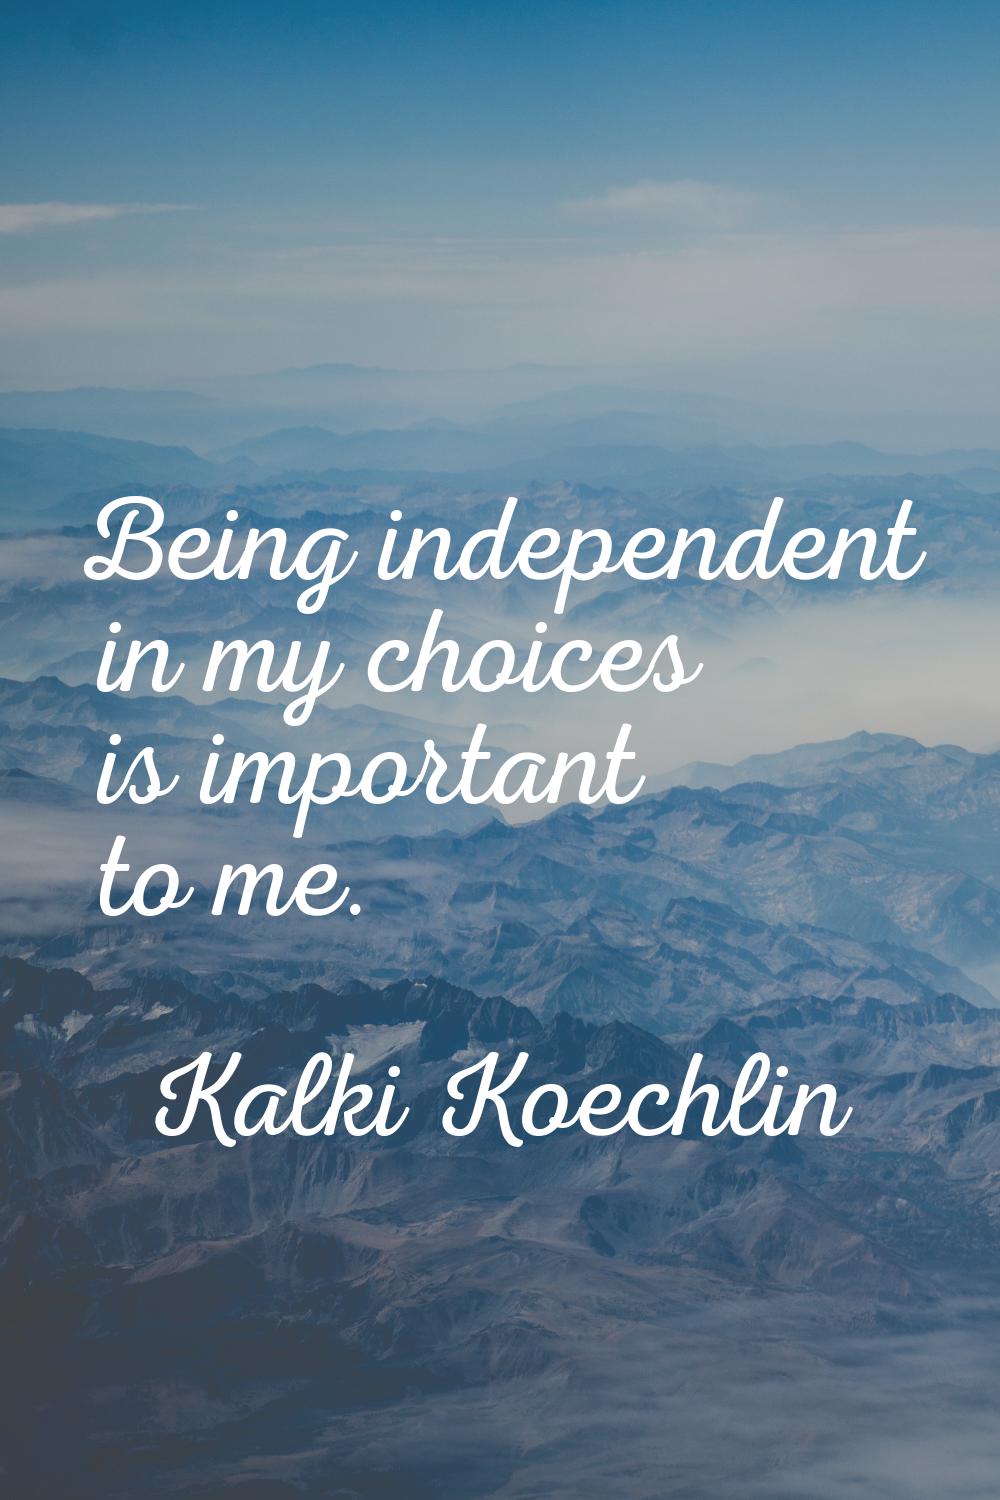 Being independent in my choices is important to me.